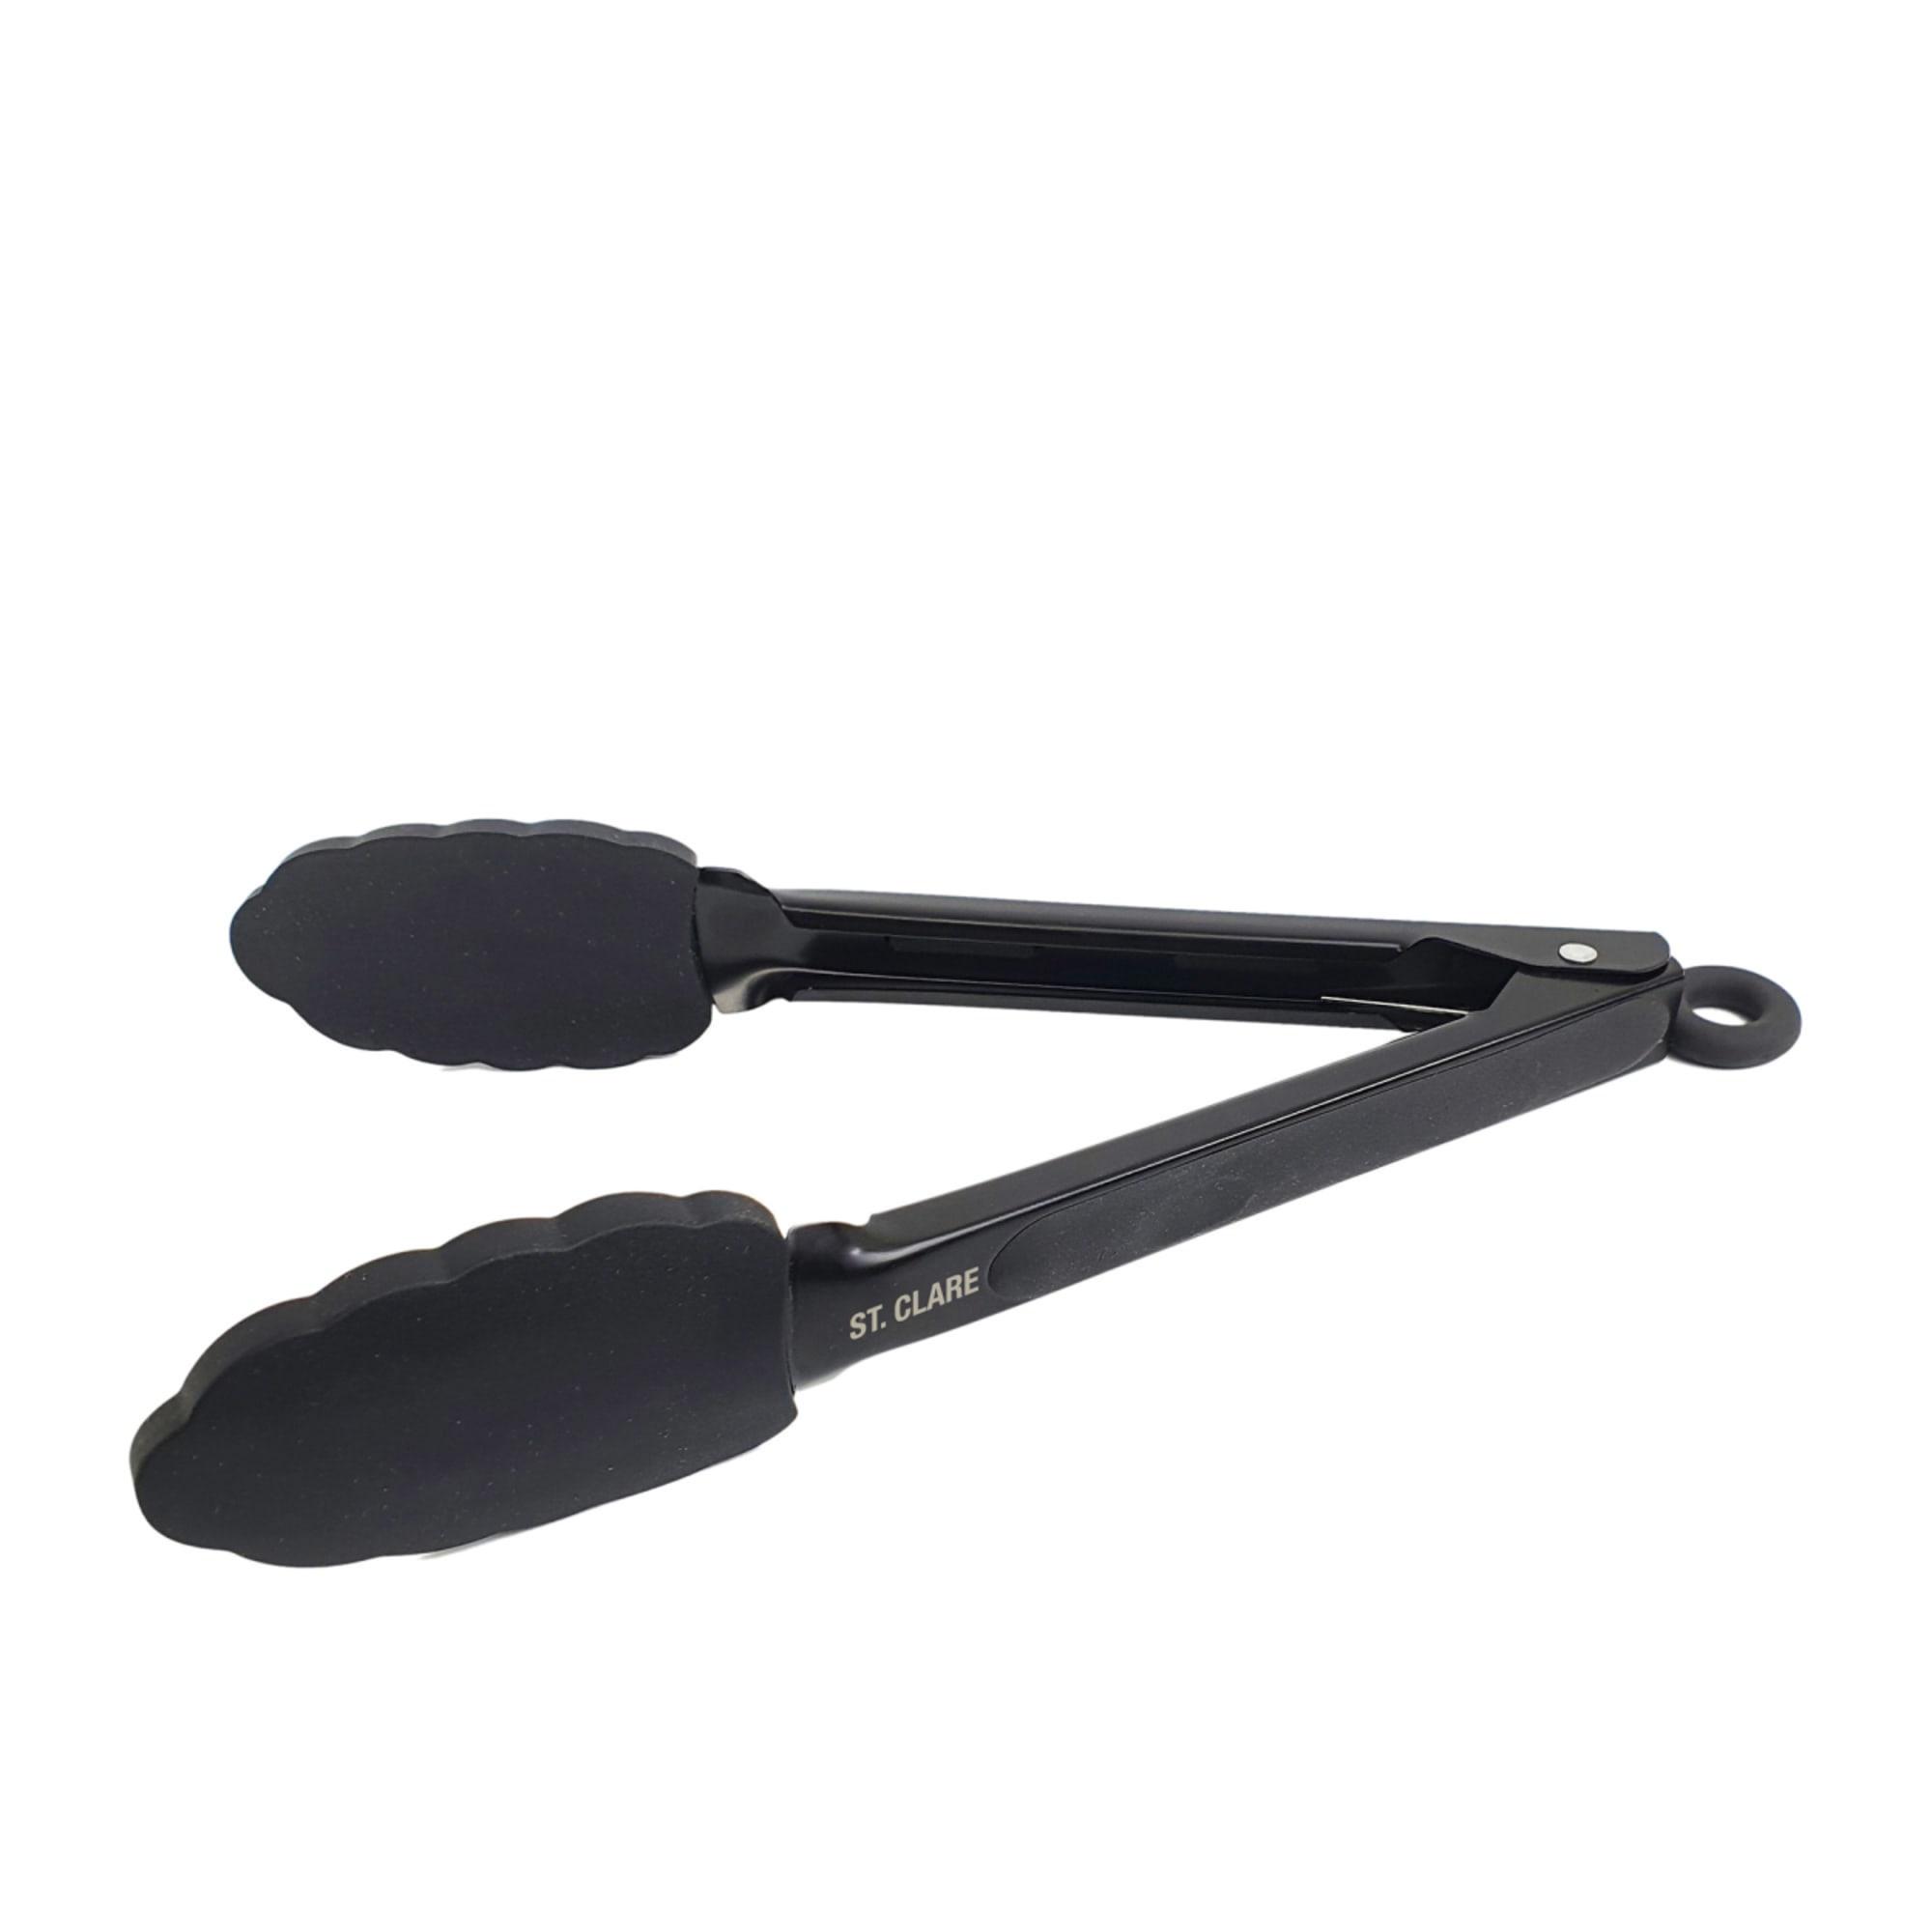 St. Clare Heavy Duty Tongs with Silicone Grip 30cm Black Image 2